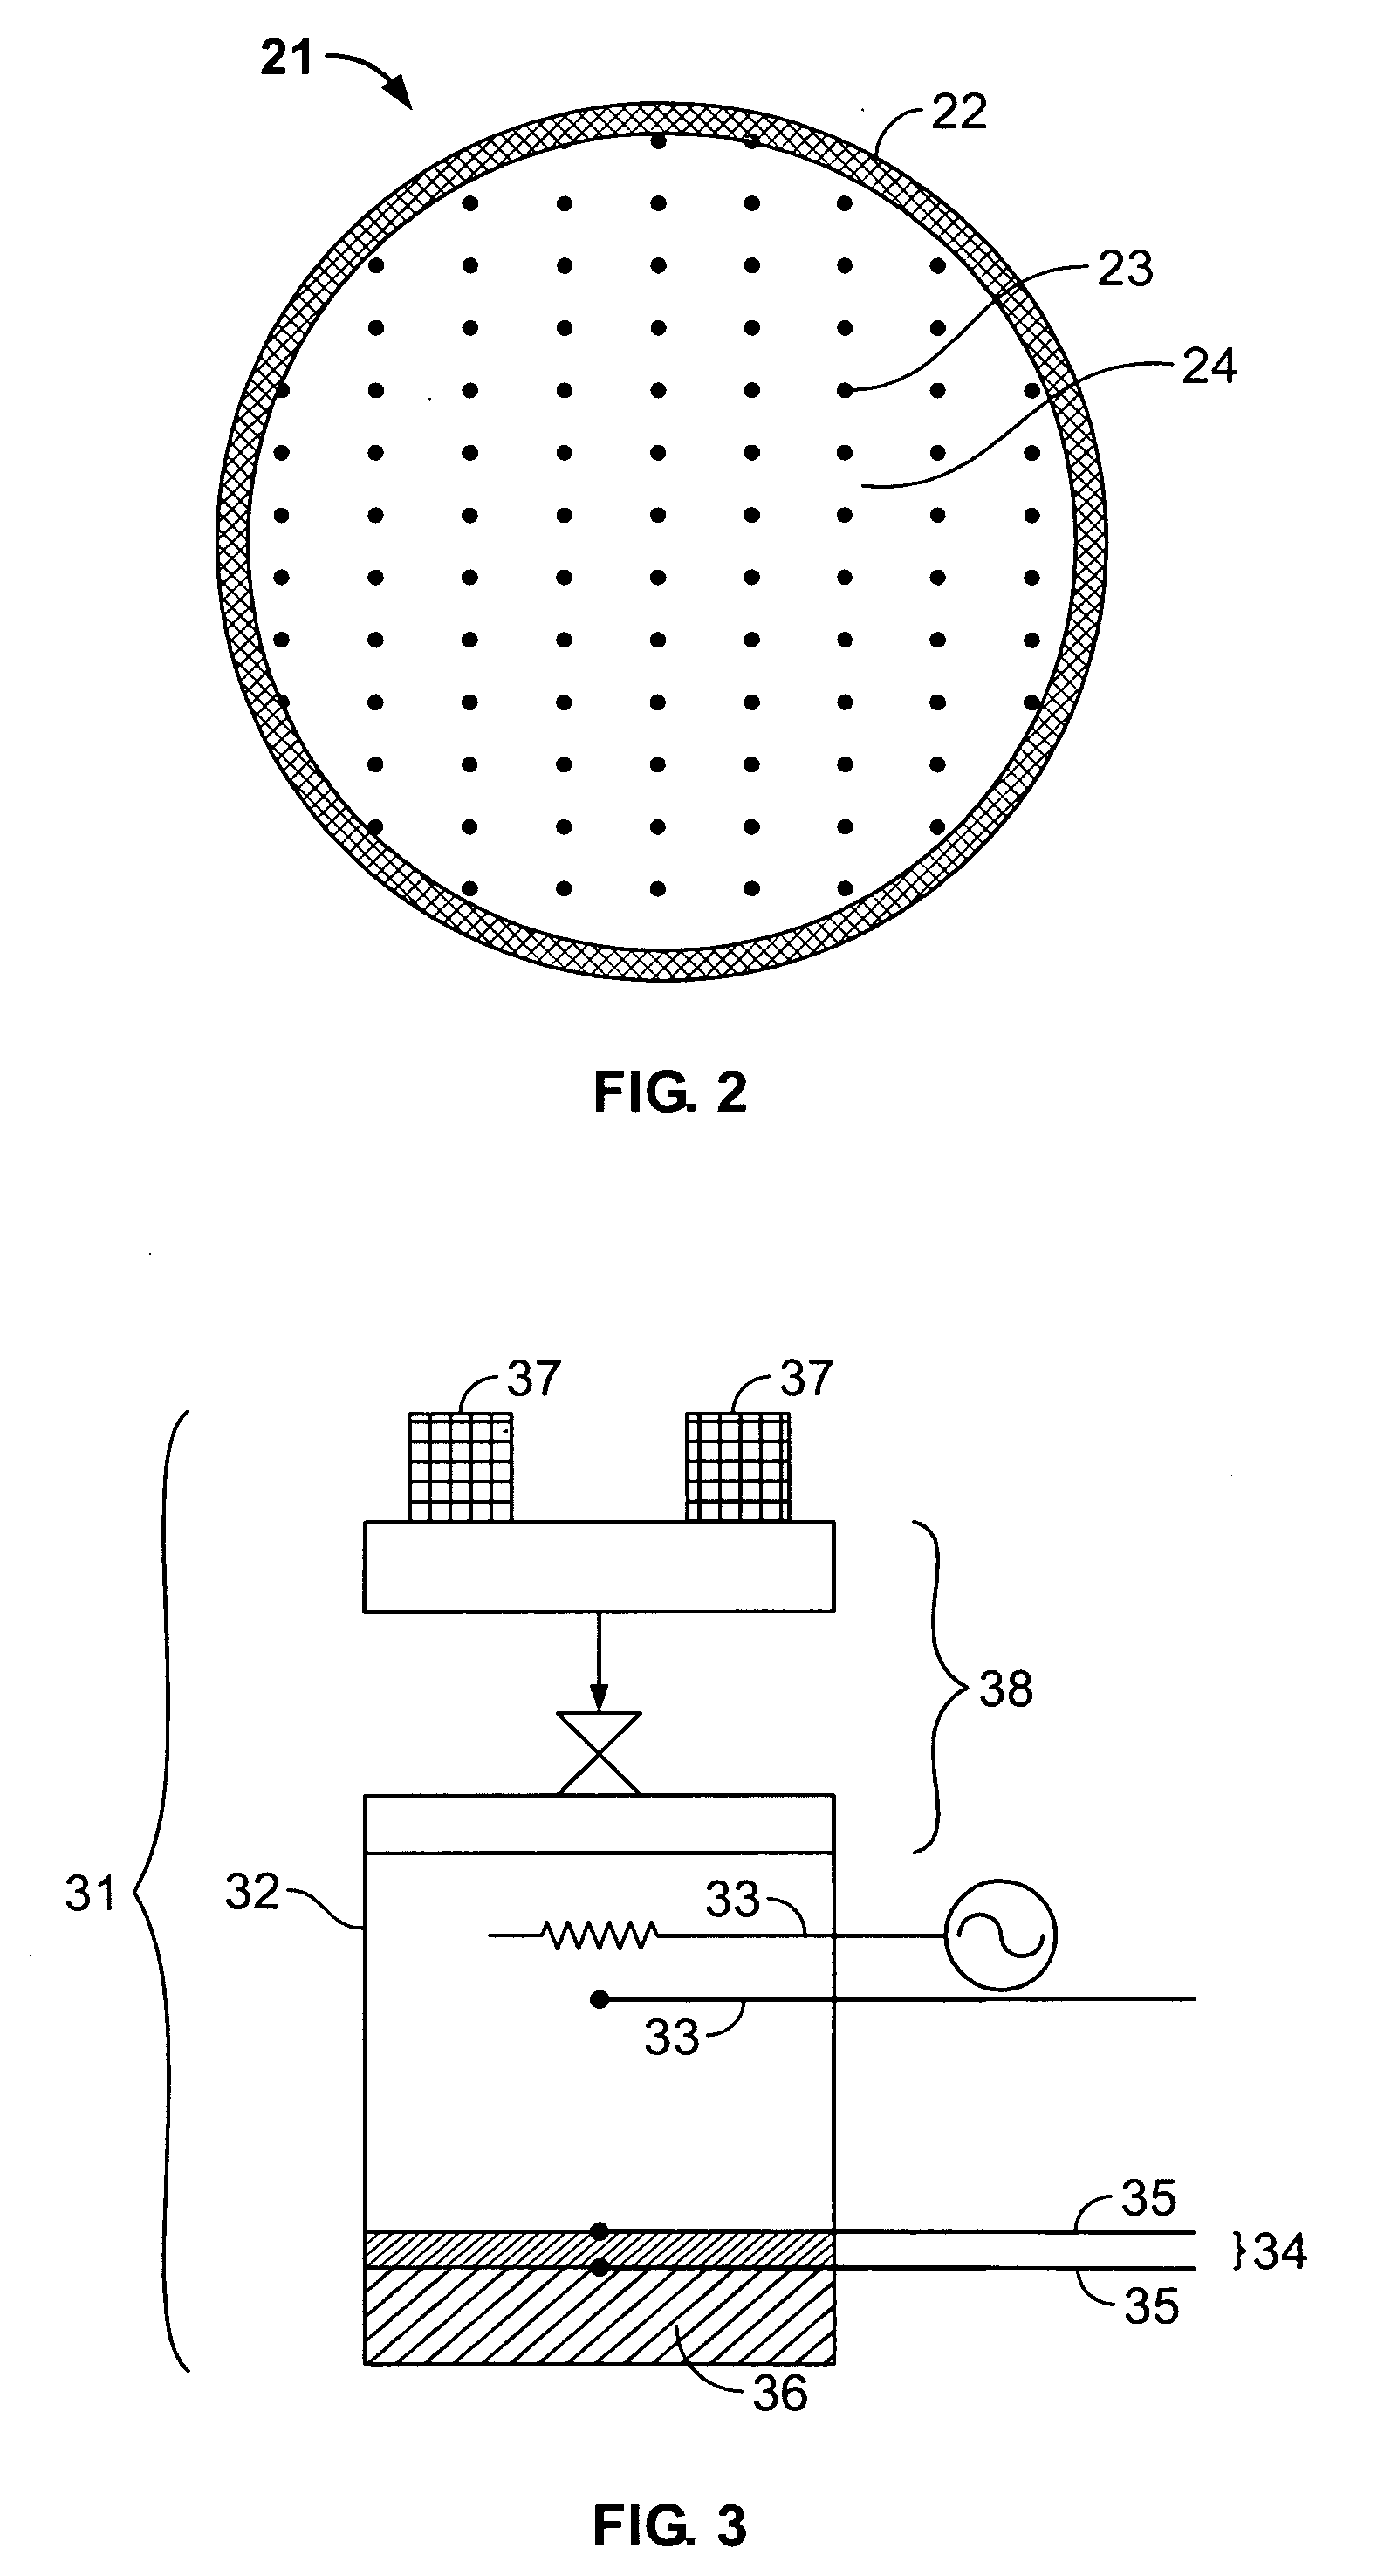 Method of determining a target mesa configuration of an electrostatic chuck